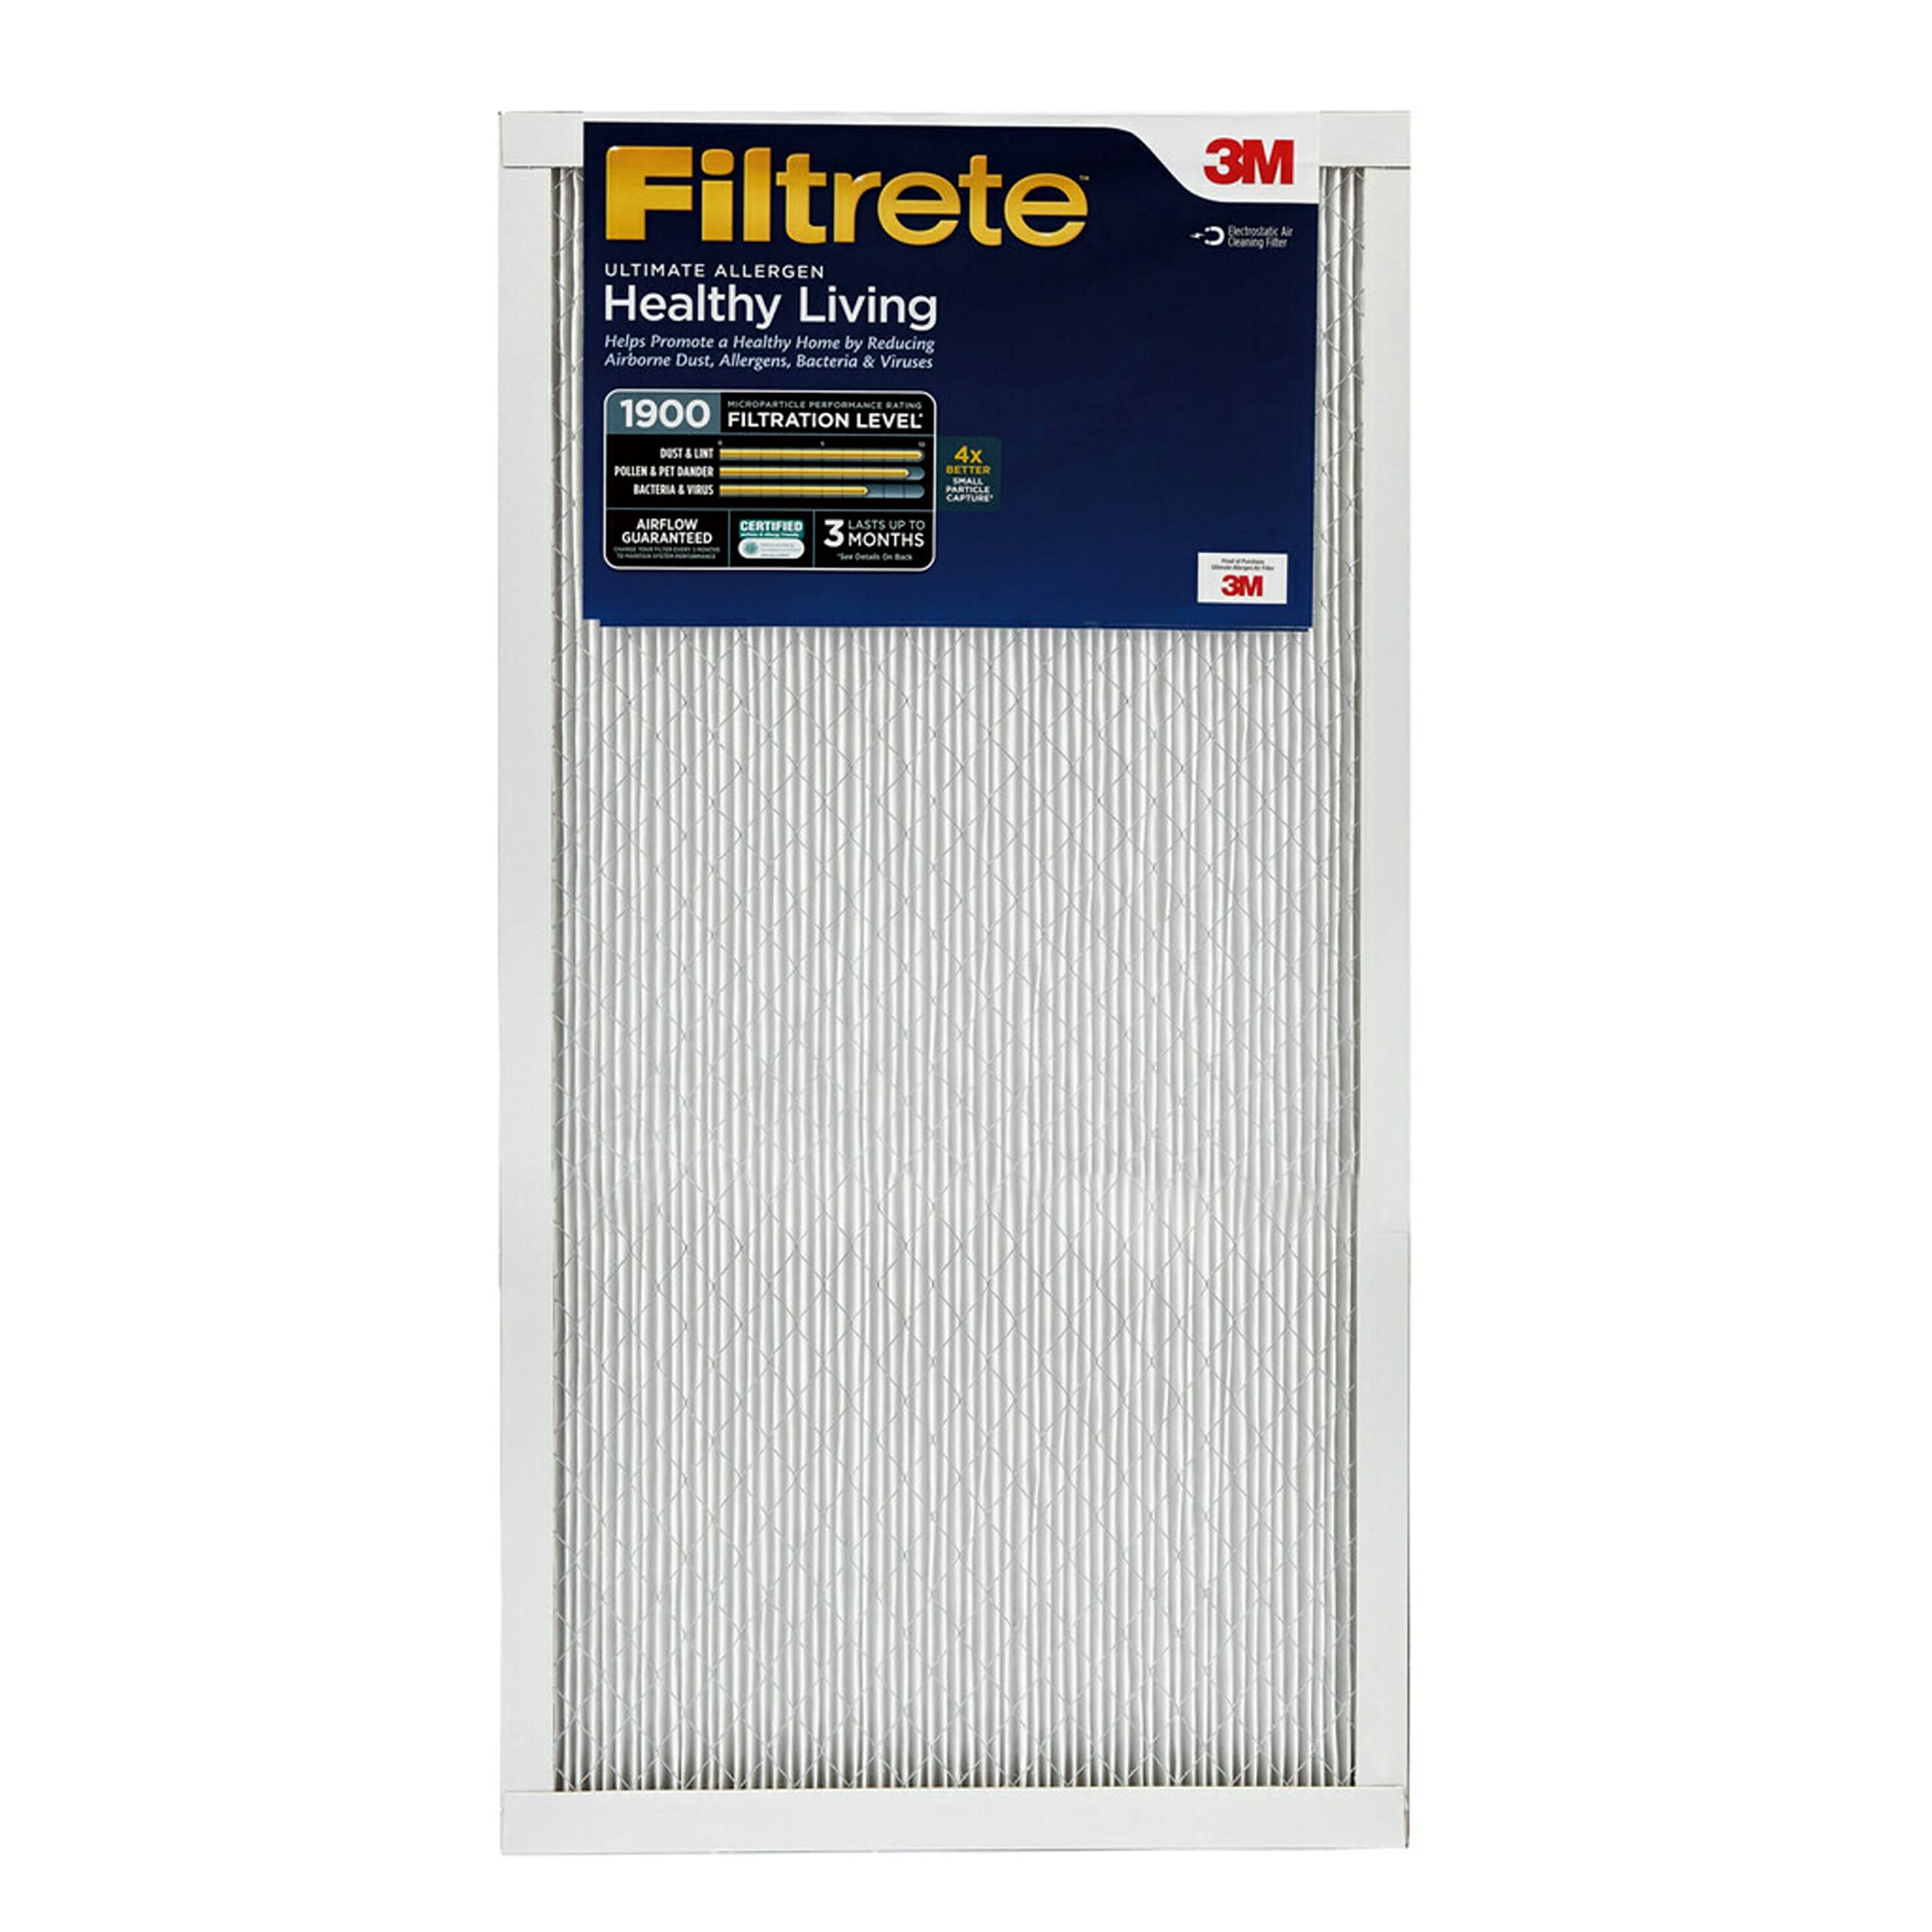 Filtrete 16x25x1 Air Filter, MPR 1900, MERV 13, Healthy Living Ultimate Allergen 3-Month Pleated 1-Inch Air Filters, 6 Filters